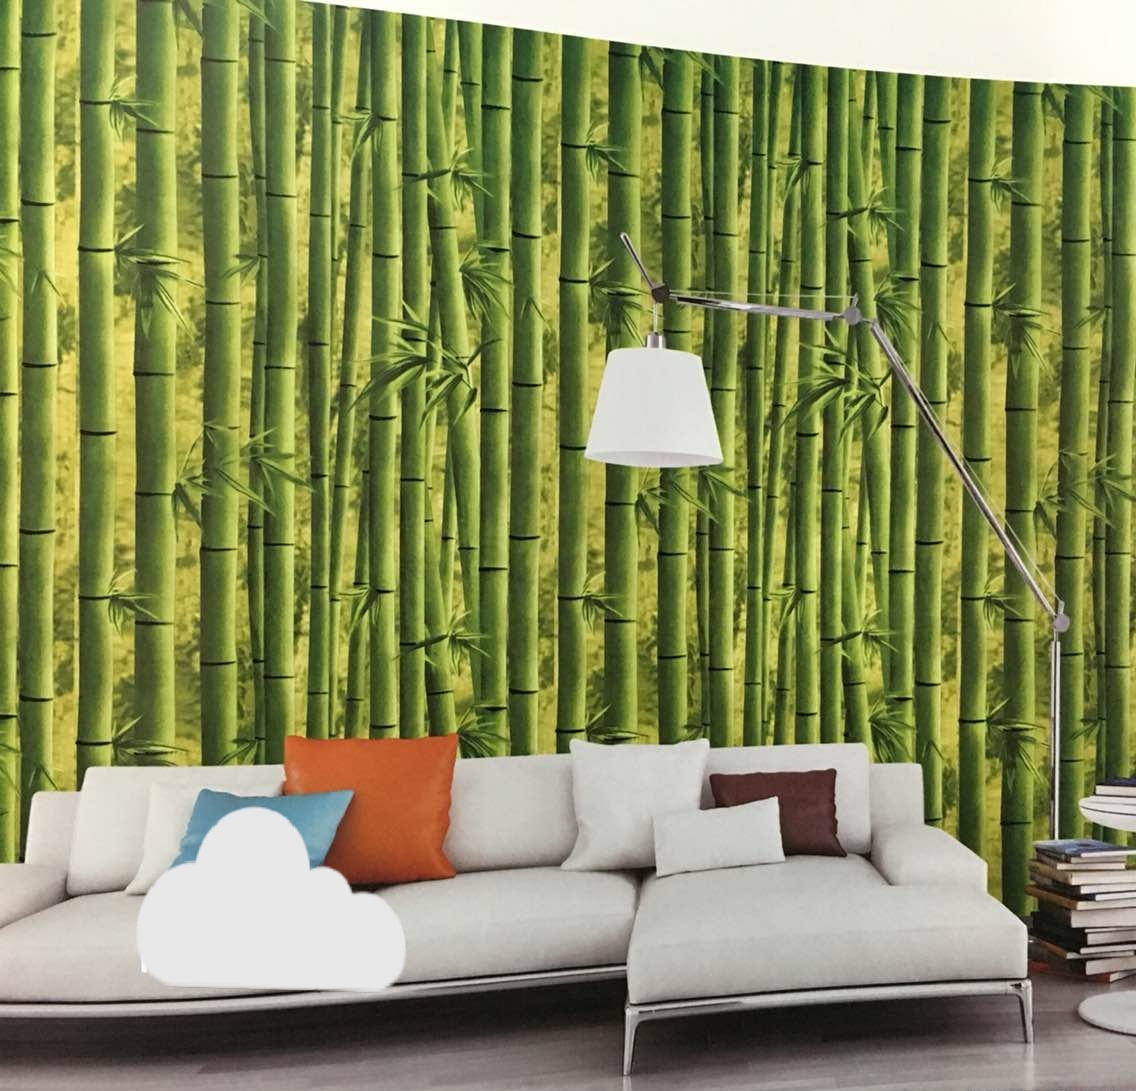 Products Green Wallpaper Design For Living Room 1136x1091 Wallpaper